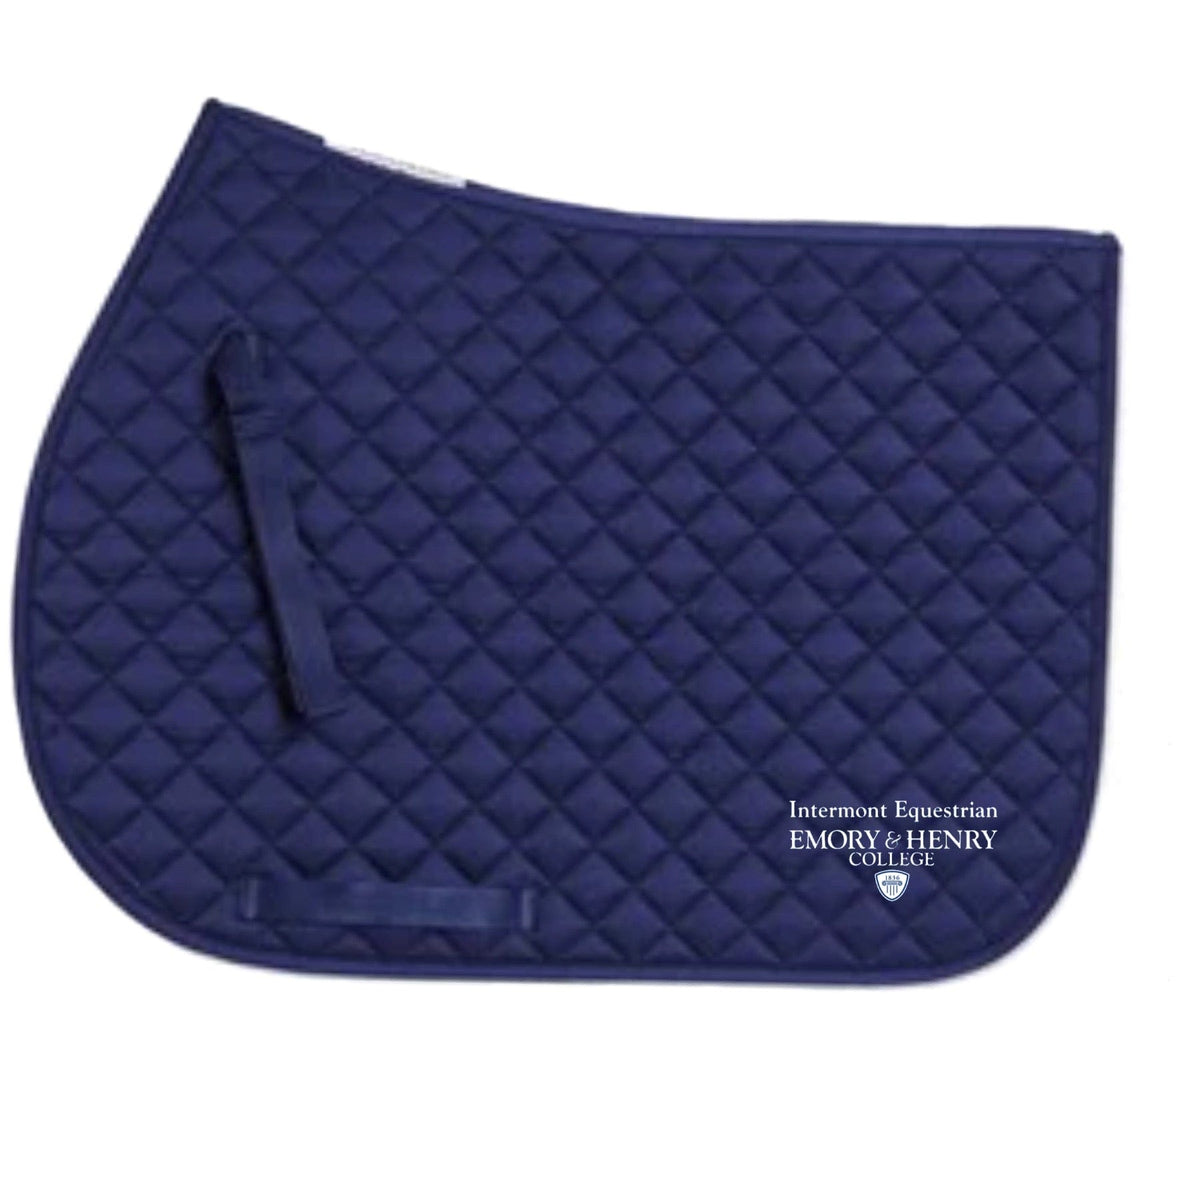 Equestrian Team Apparel Emory & Henry Saddle Pad equestrian team apparel online tack store mobile tack store custom farm apparel custom show stable clothing equestrian lifestyle horse show clothing riding clothes horses equestrian tack store